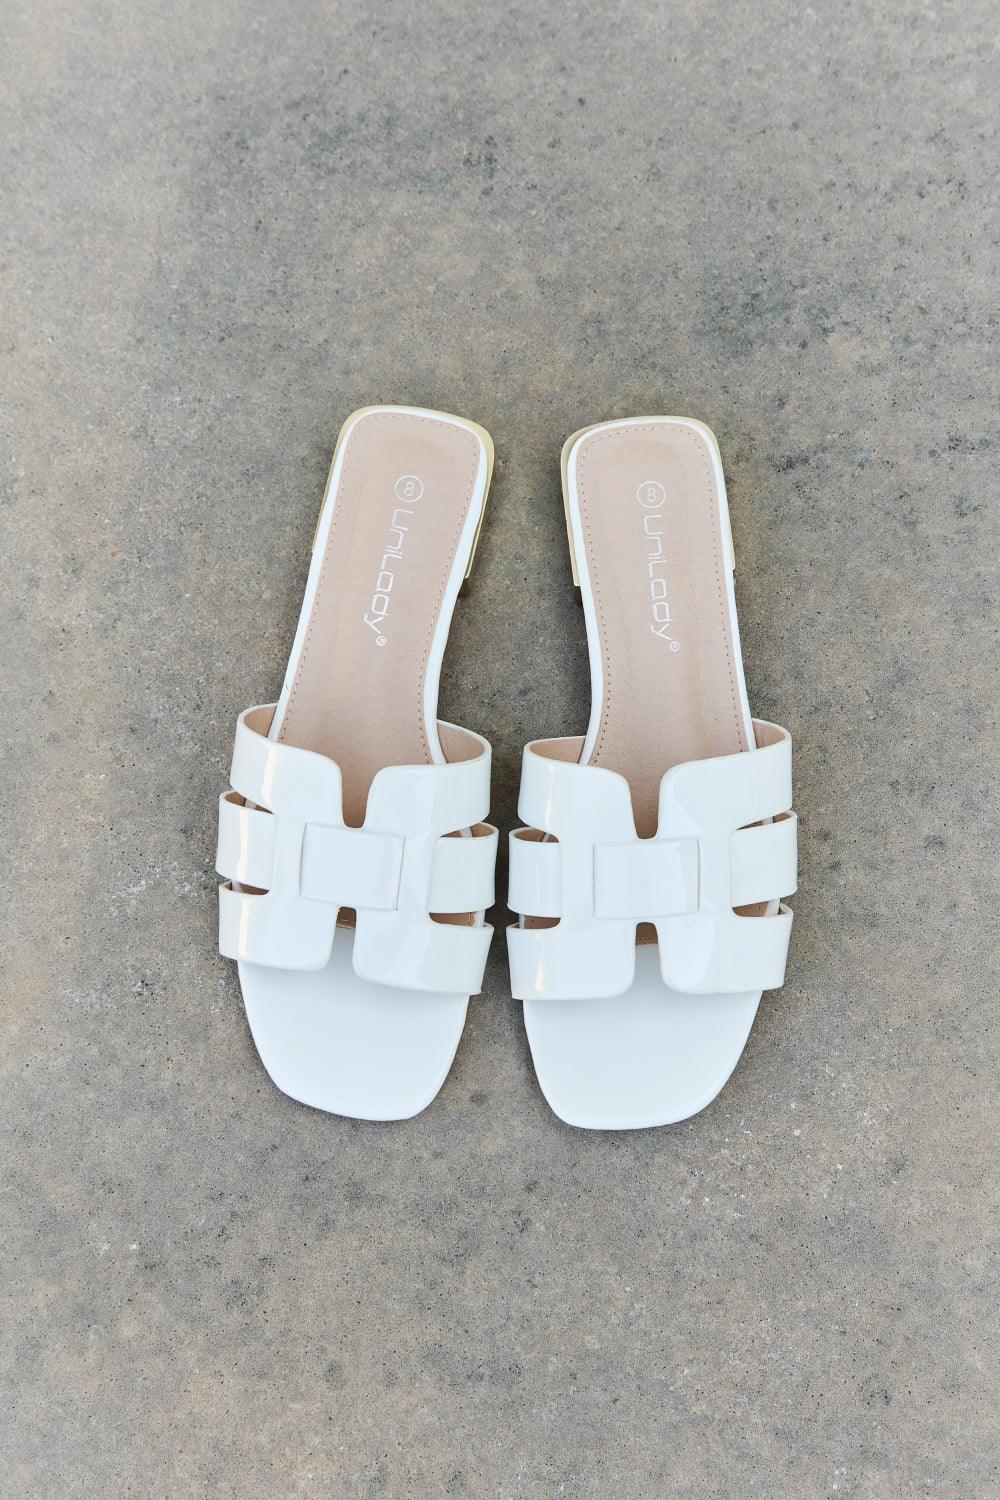 Walk It Out Slide Sandals in Icy White - SAVLUXE